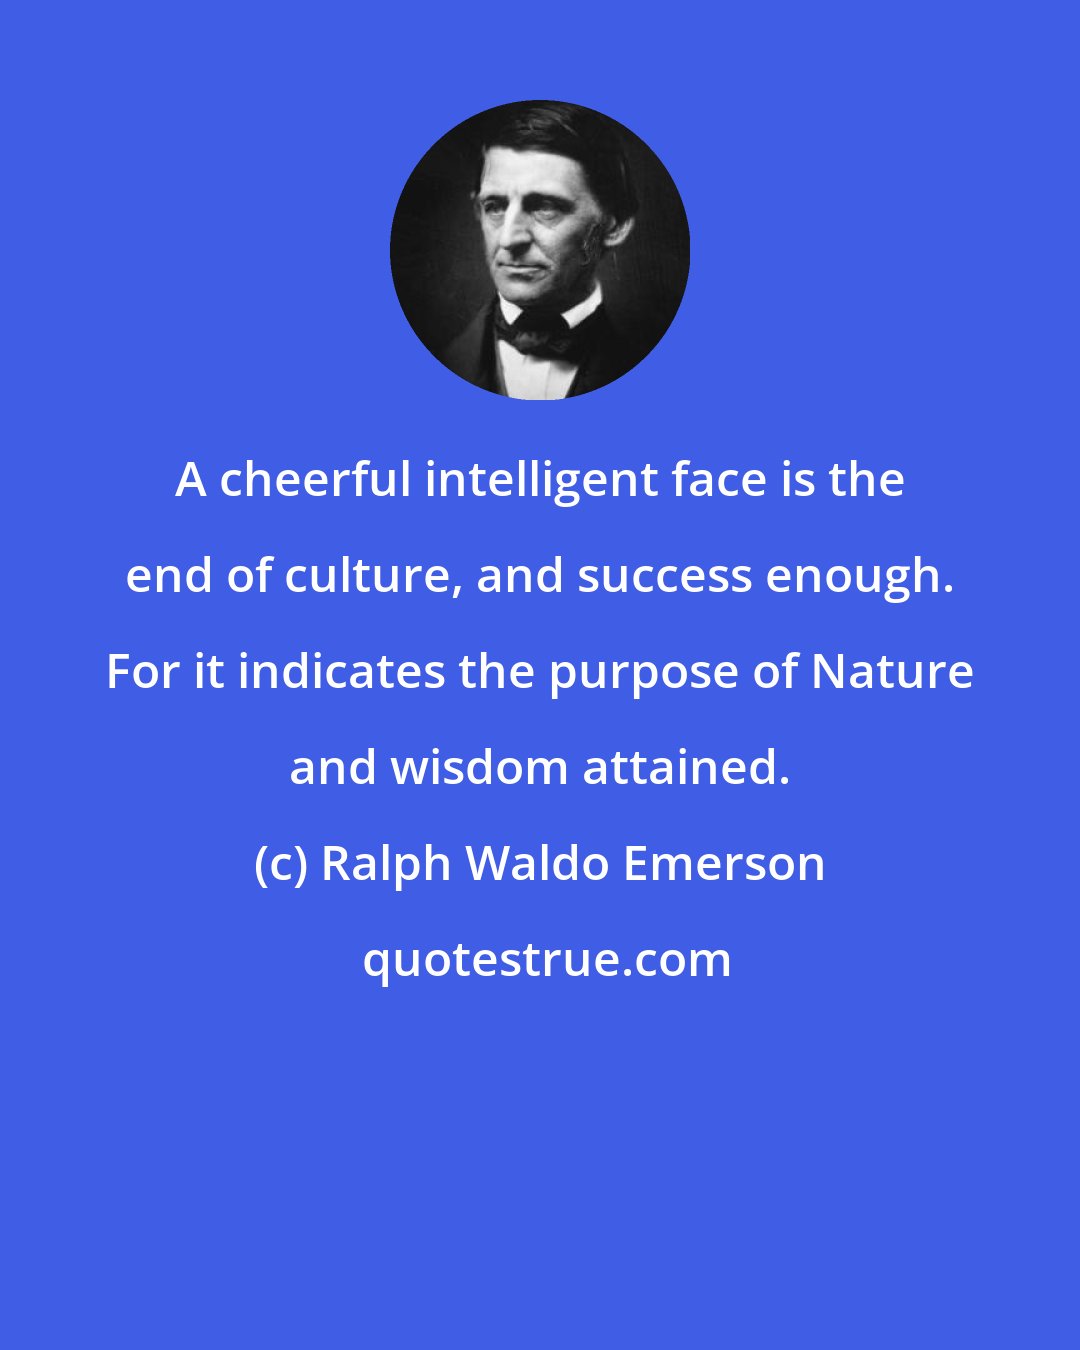 Ralph Waldo Emerson: A cheerful intelligent face is the end of culture, and success enough. For it indicates the purpose of Nature and wisdom attained.